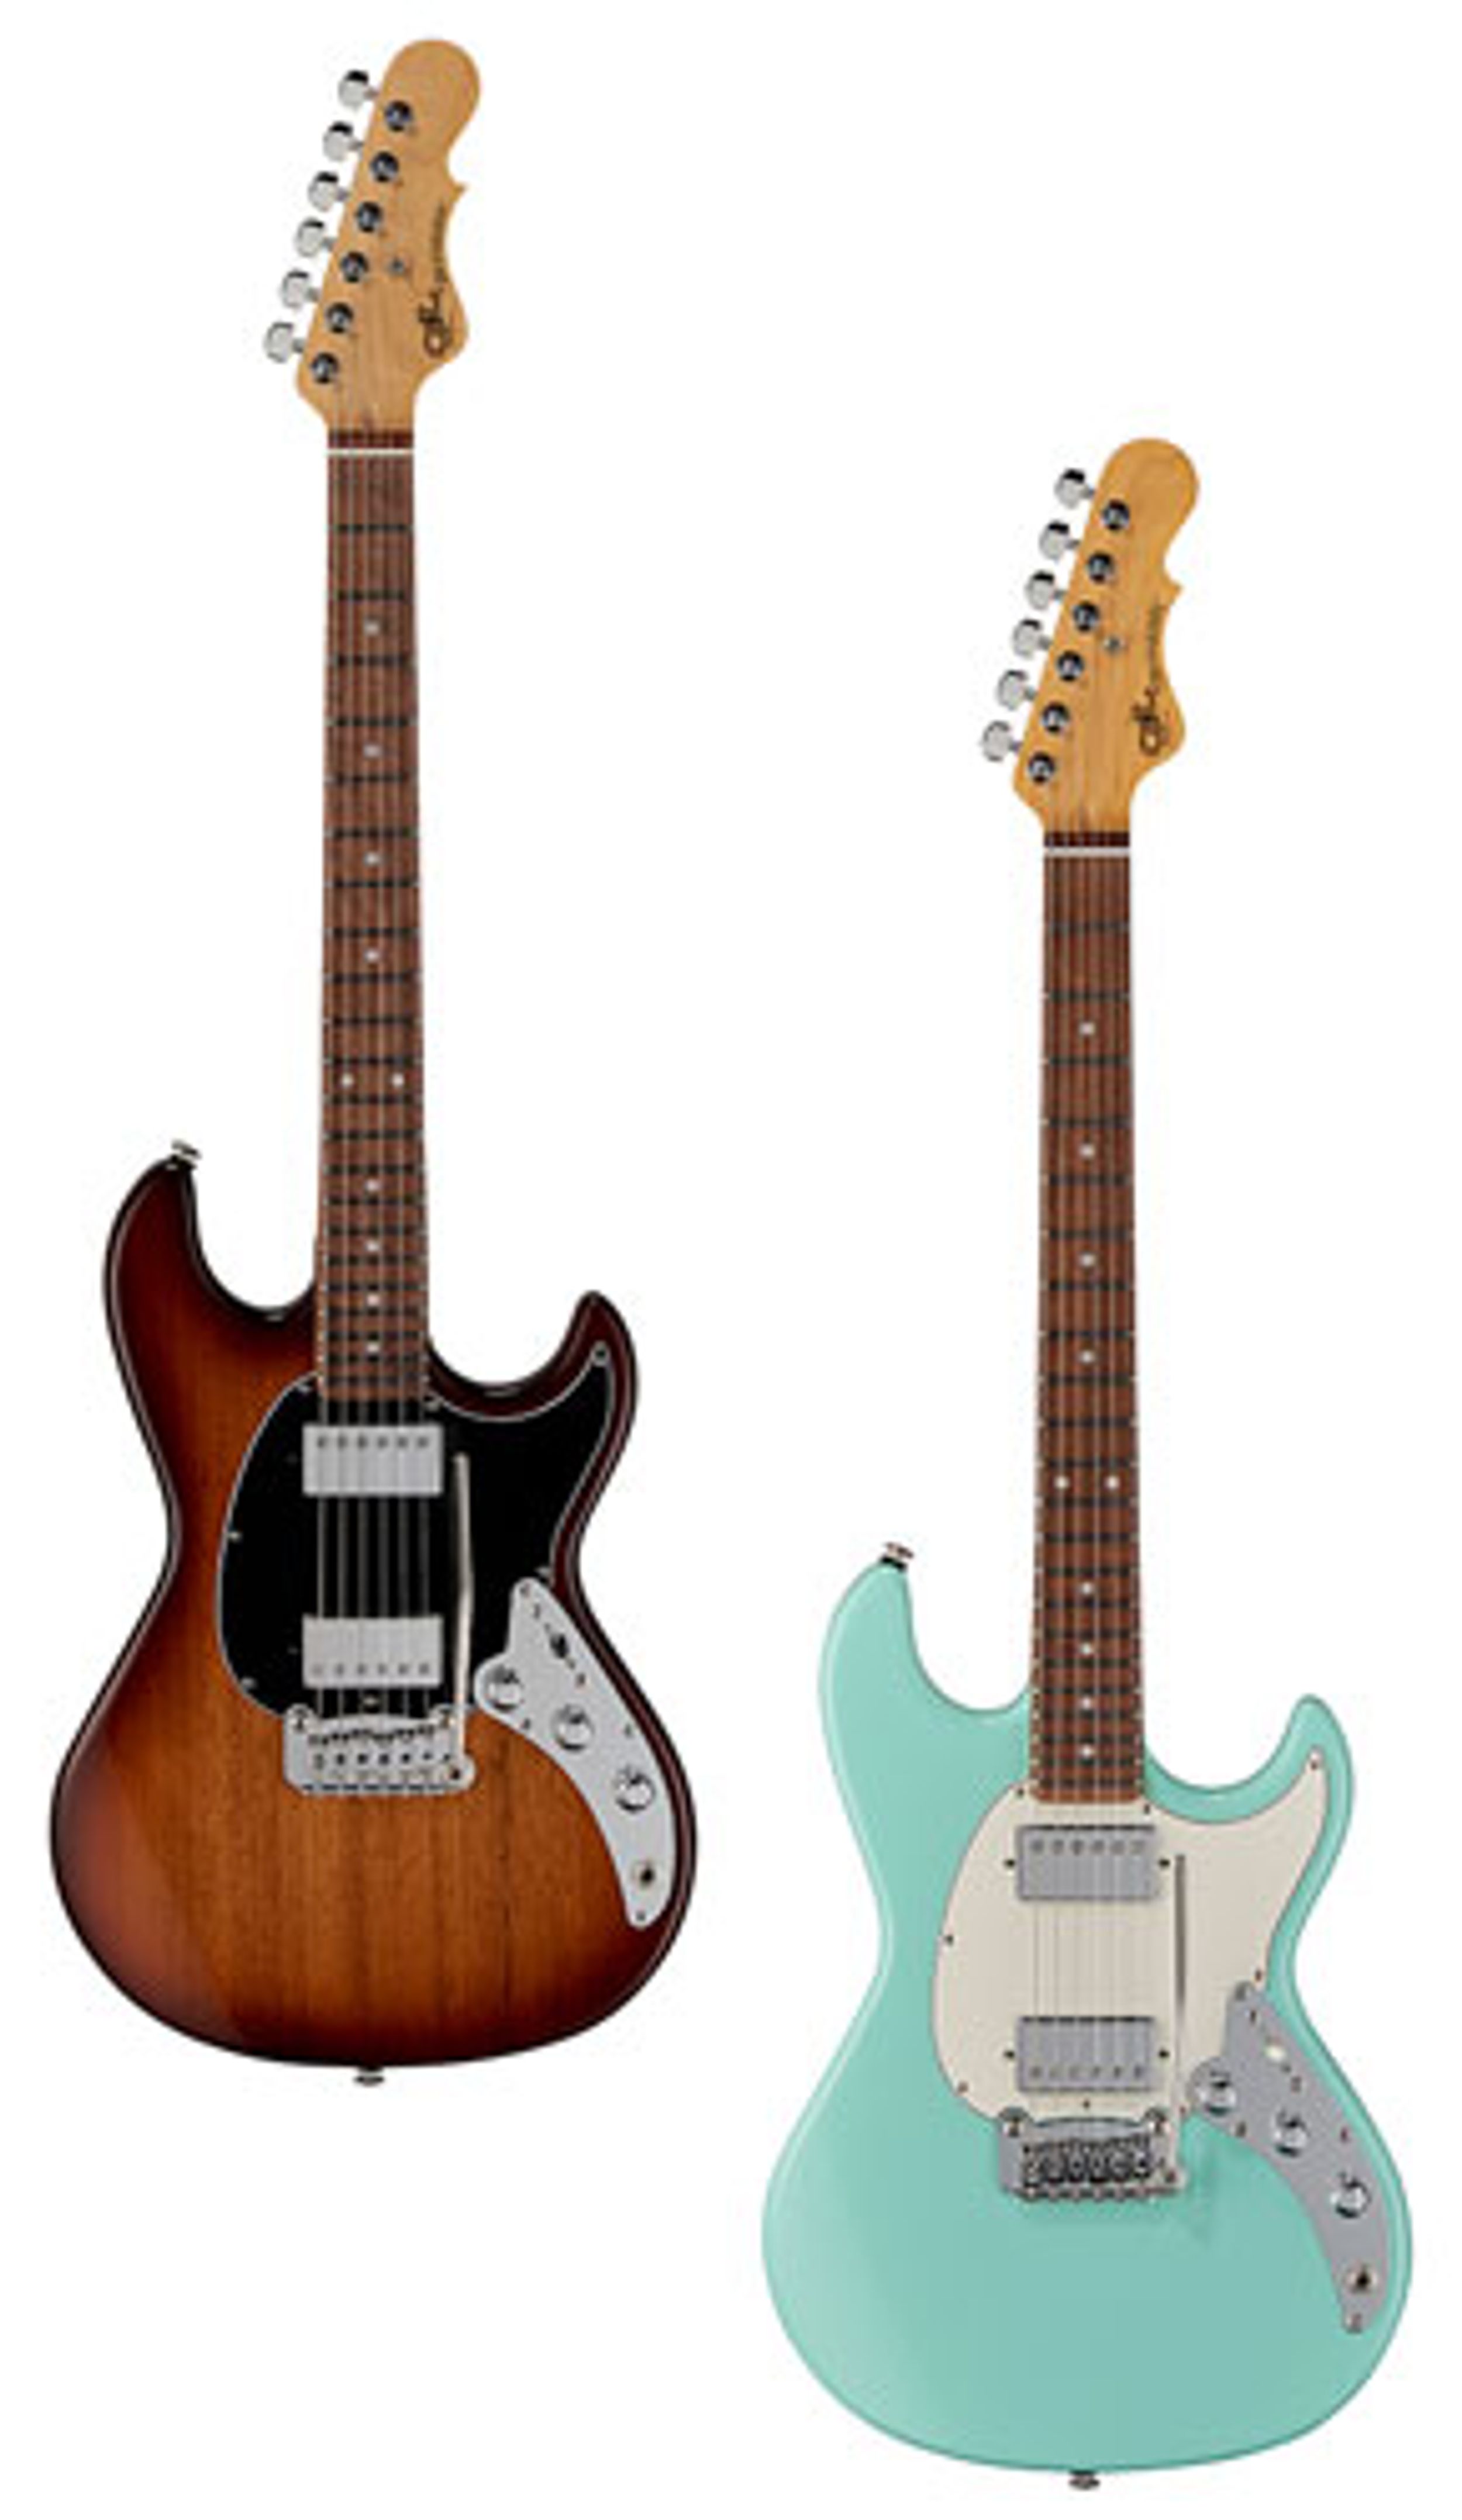 G&L Introduces the Fullerton Deluxe Skyhawk HH